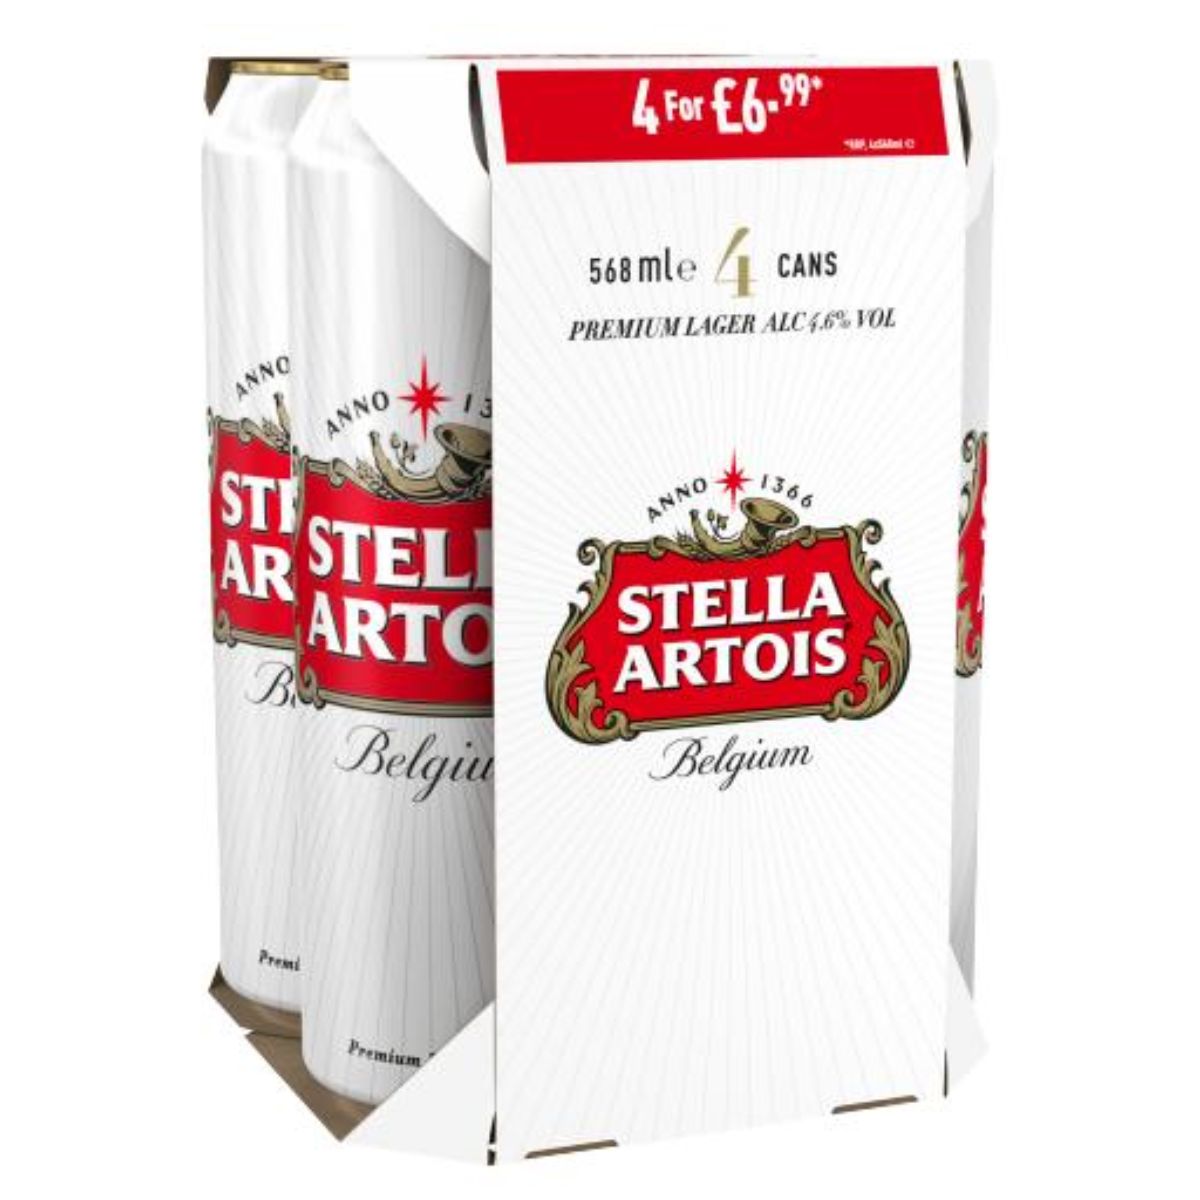 Four cans of Stella Artois - Premium Lager (4.6% ABV) - 4x568ml on a white background.